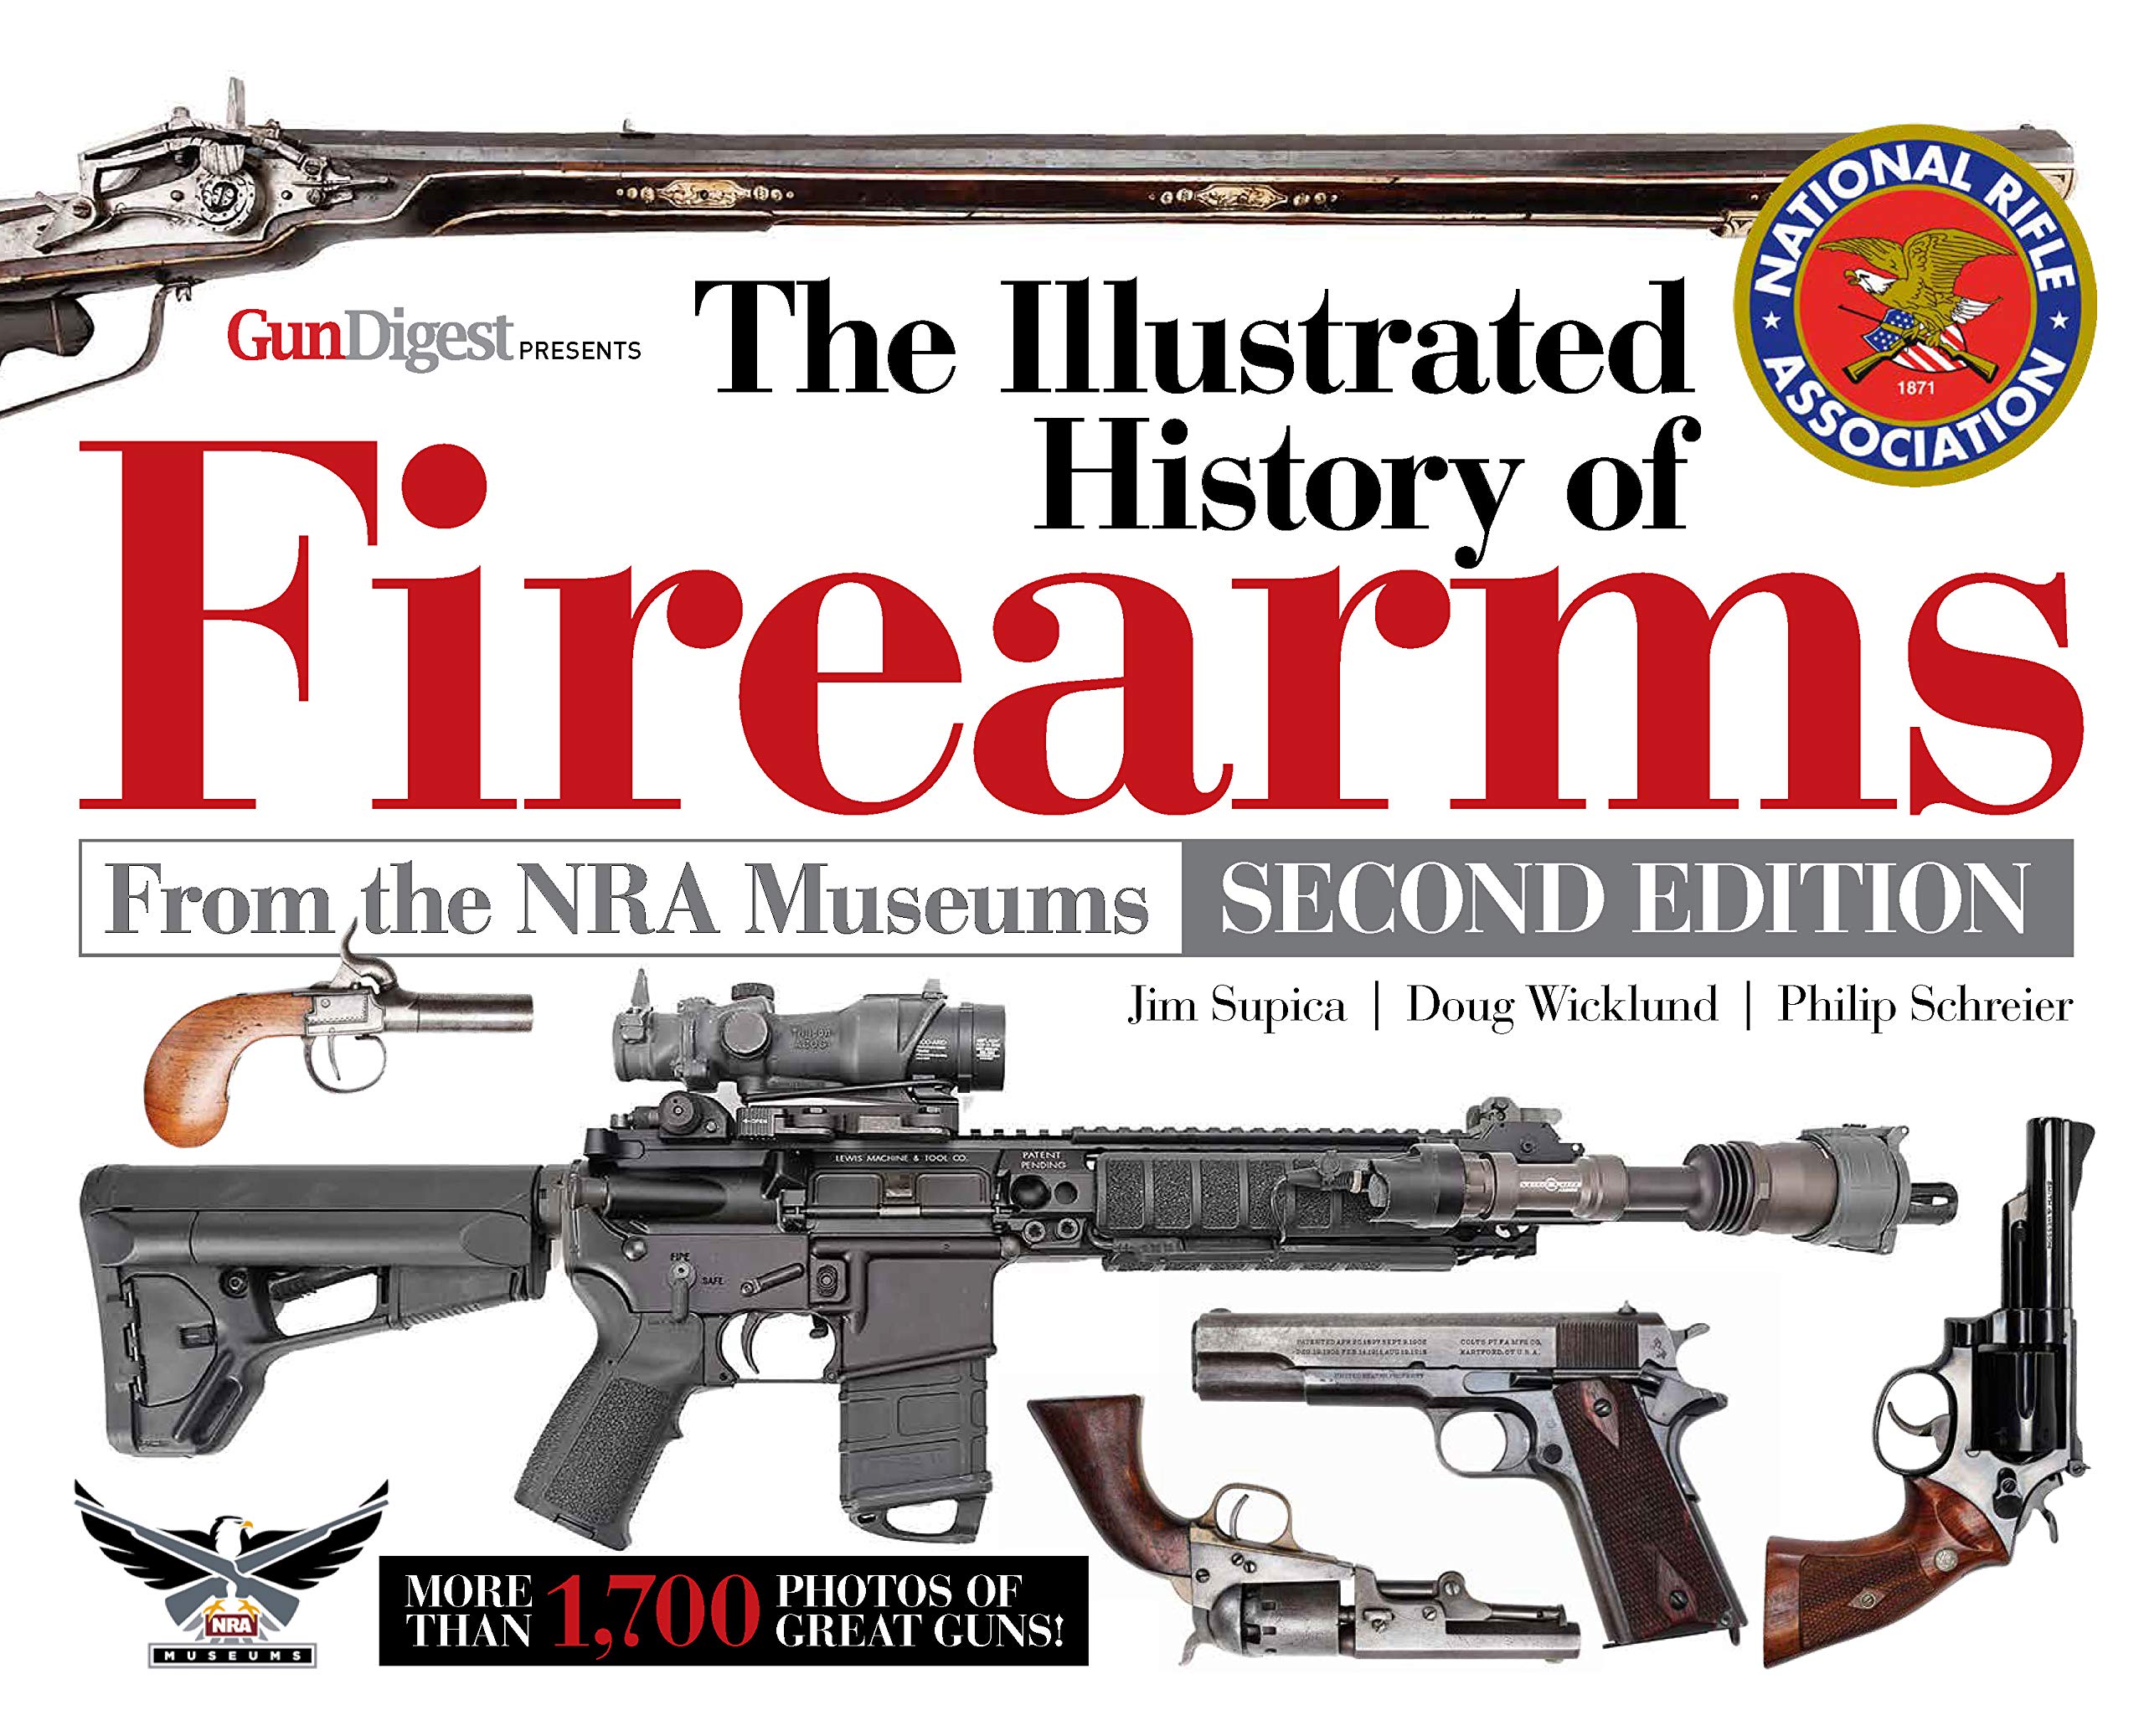 A Brief History of Guns in the U.S.